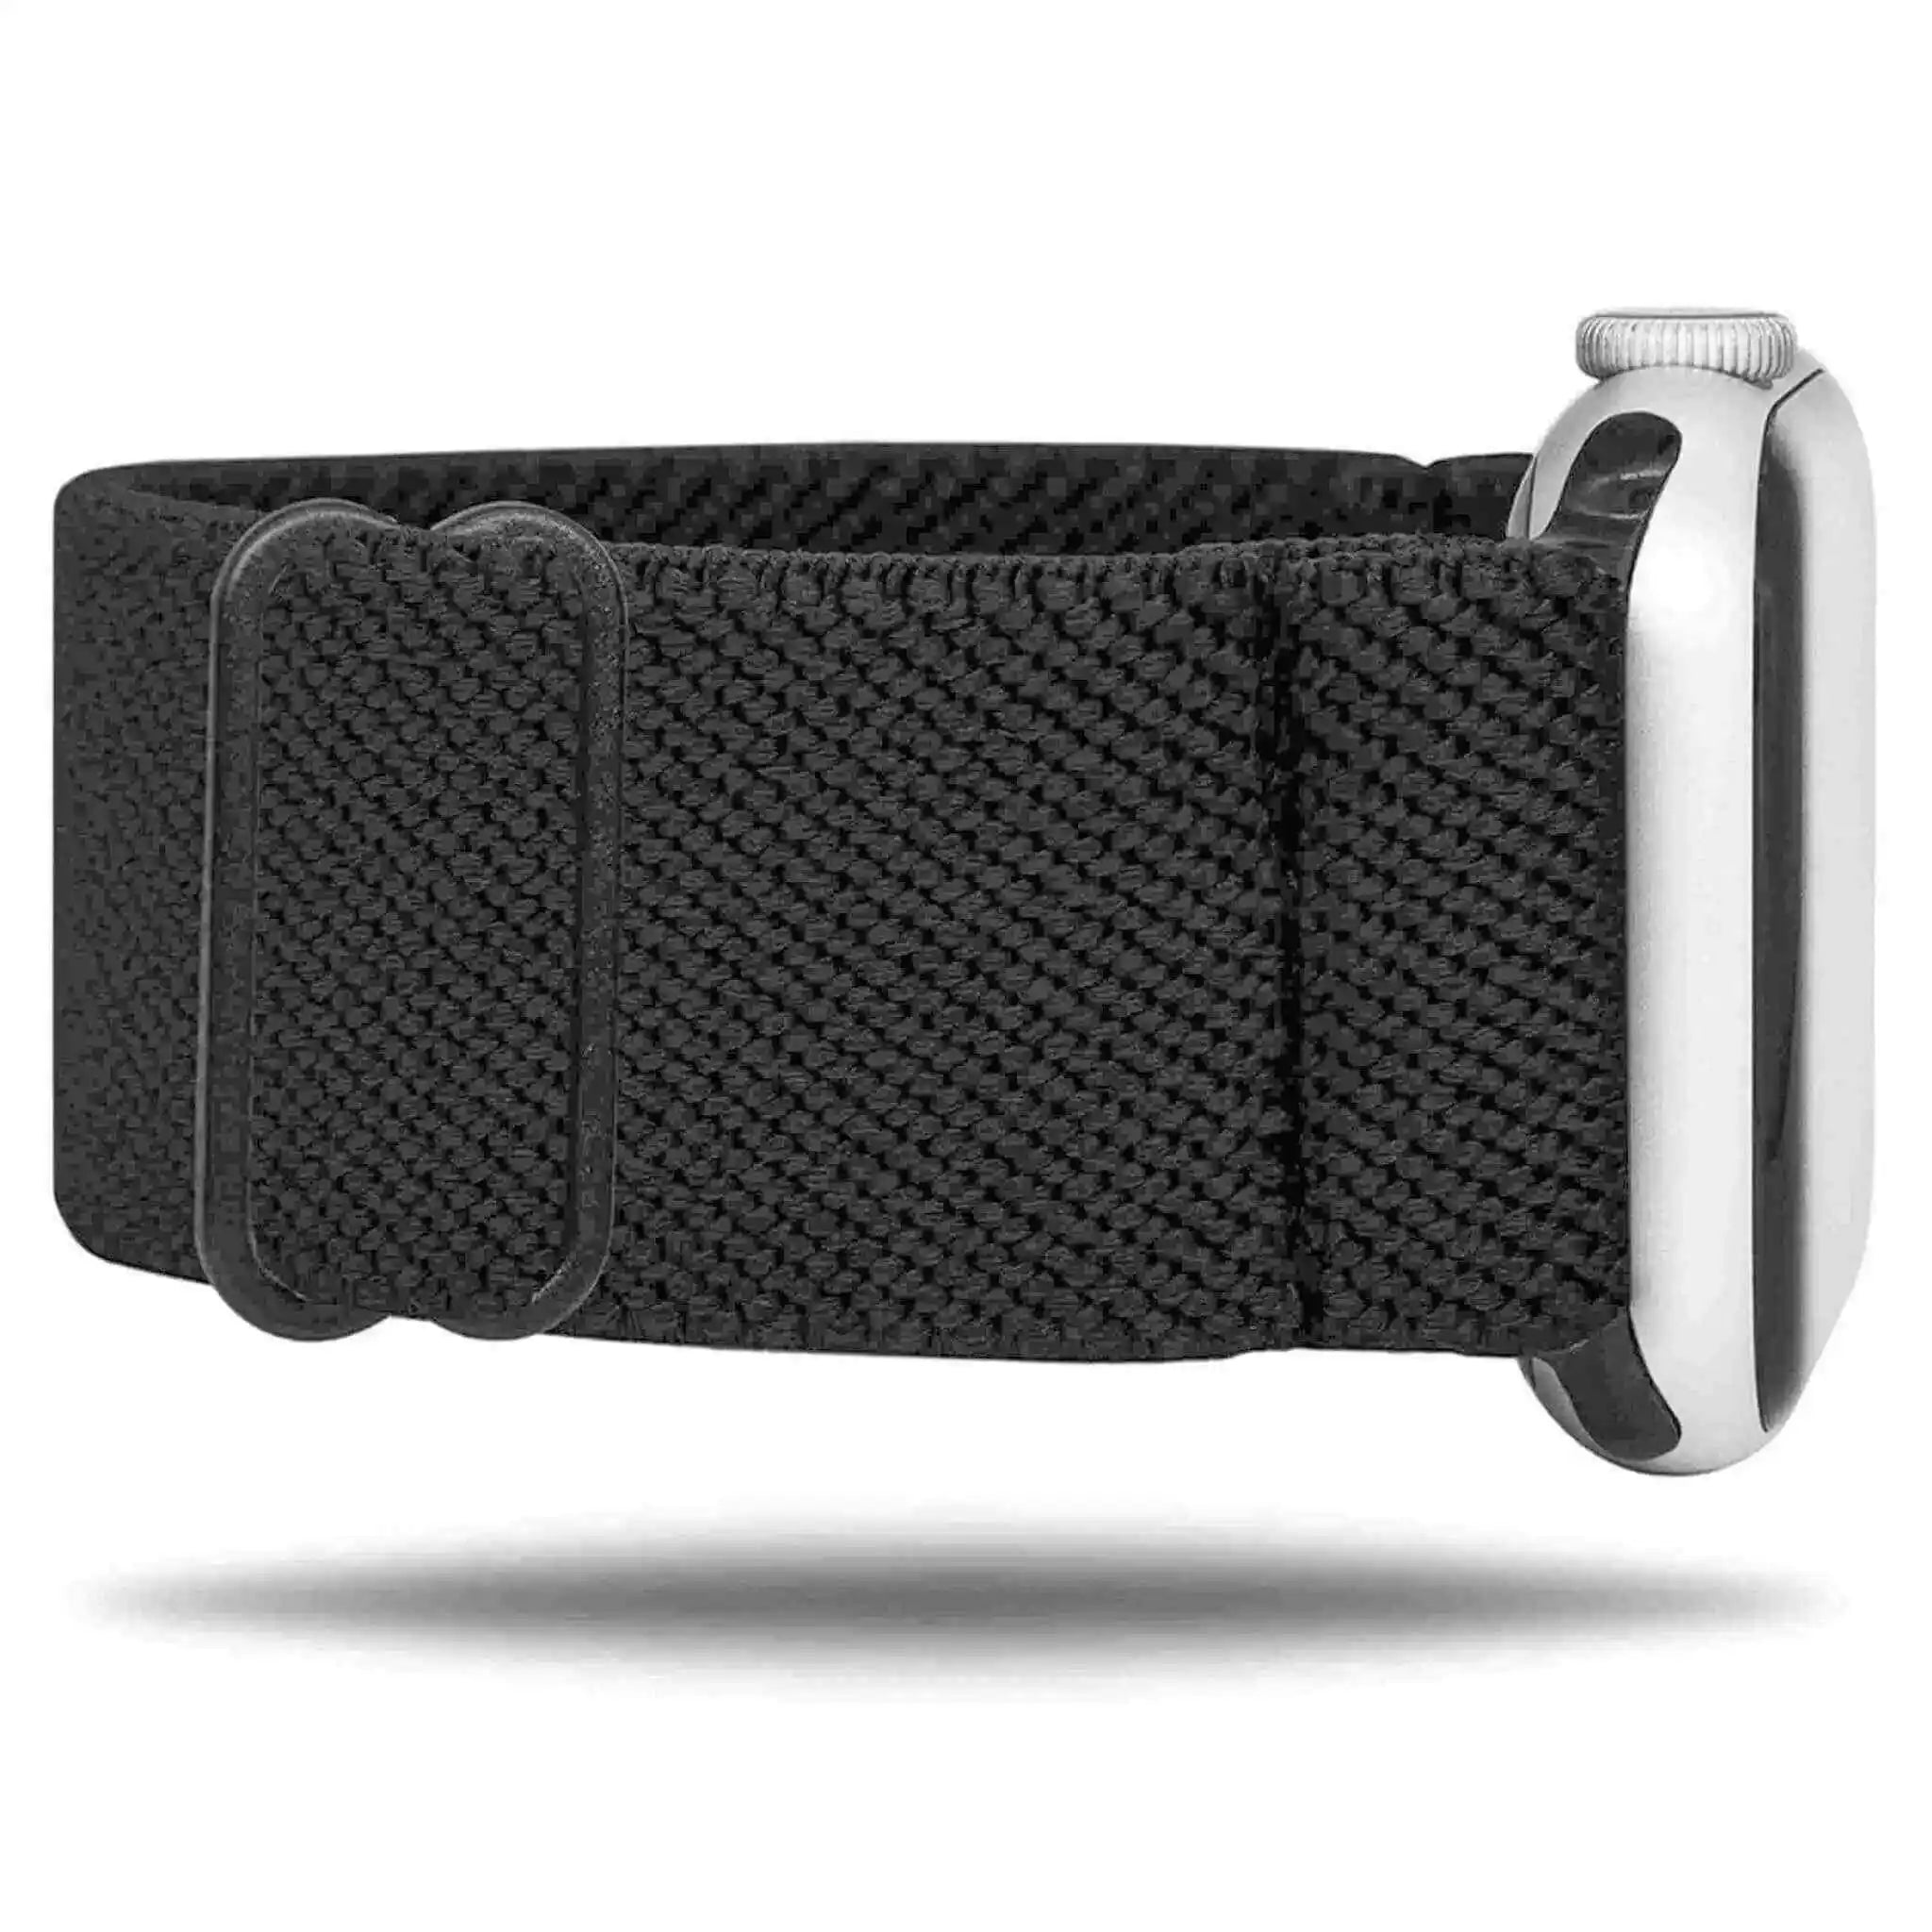 Blackout Braxley Apple Watch Band in best sellers section